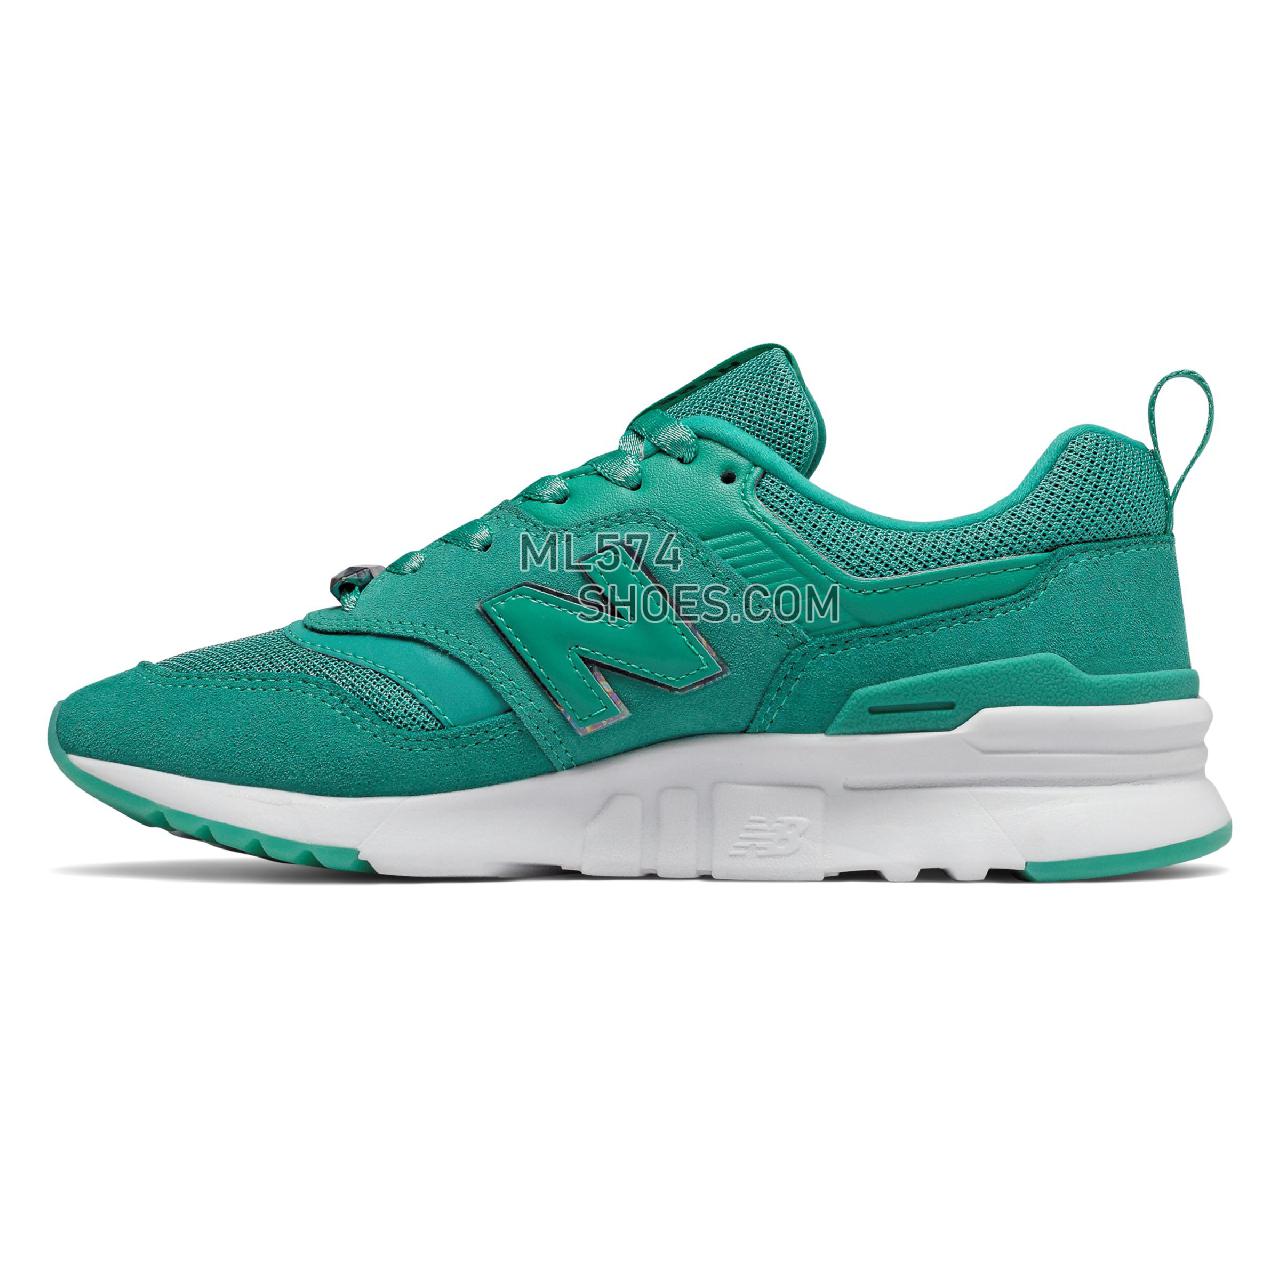 New Balance 997H Mystic Crystal - Women's Classic Sneakers - Verdite with White - CW997HJA